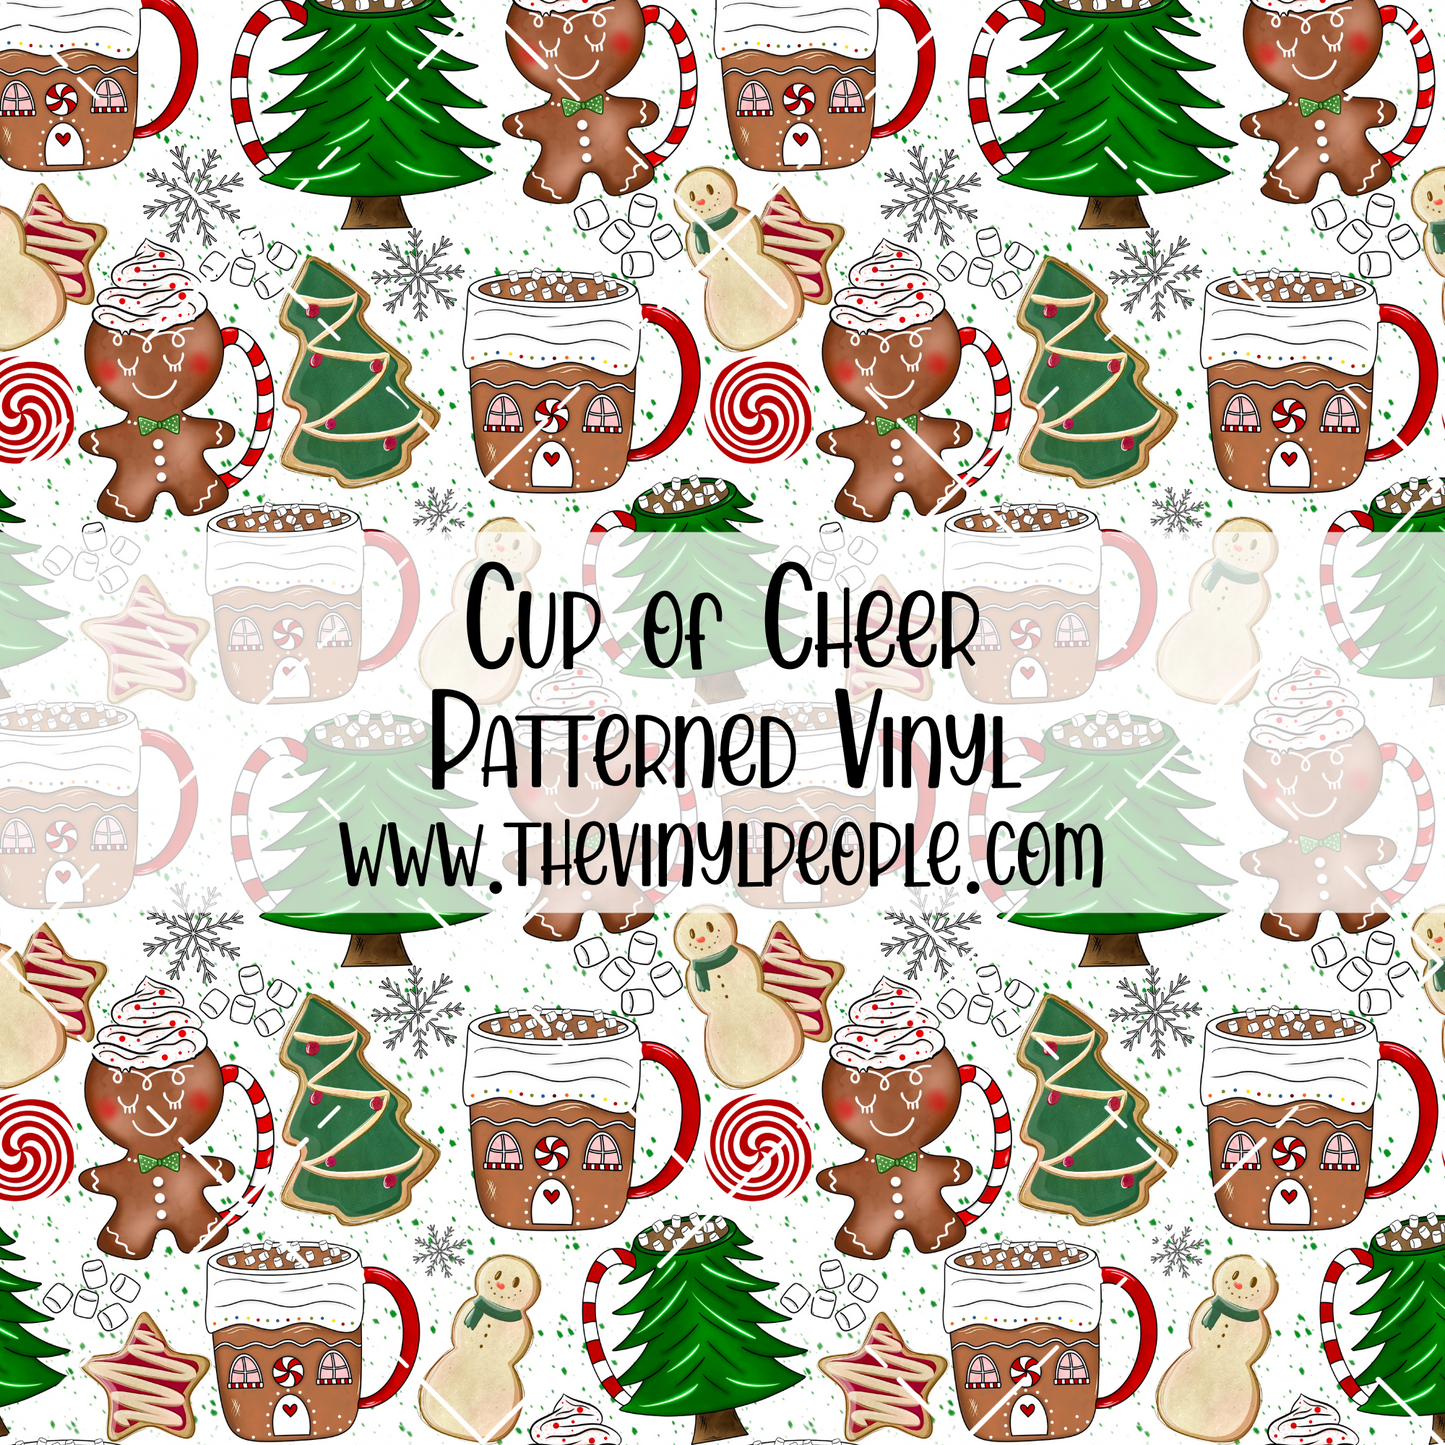 Cup of Cheer Patterned Vinyl